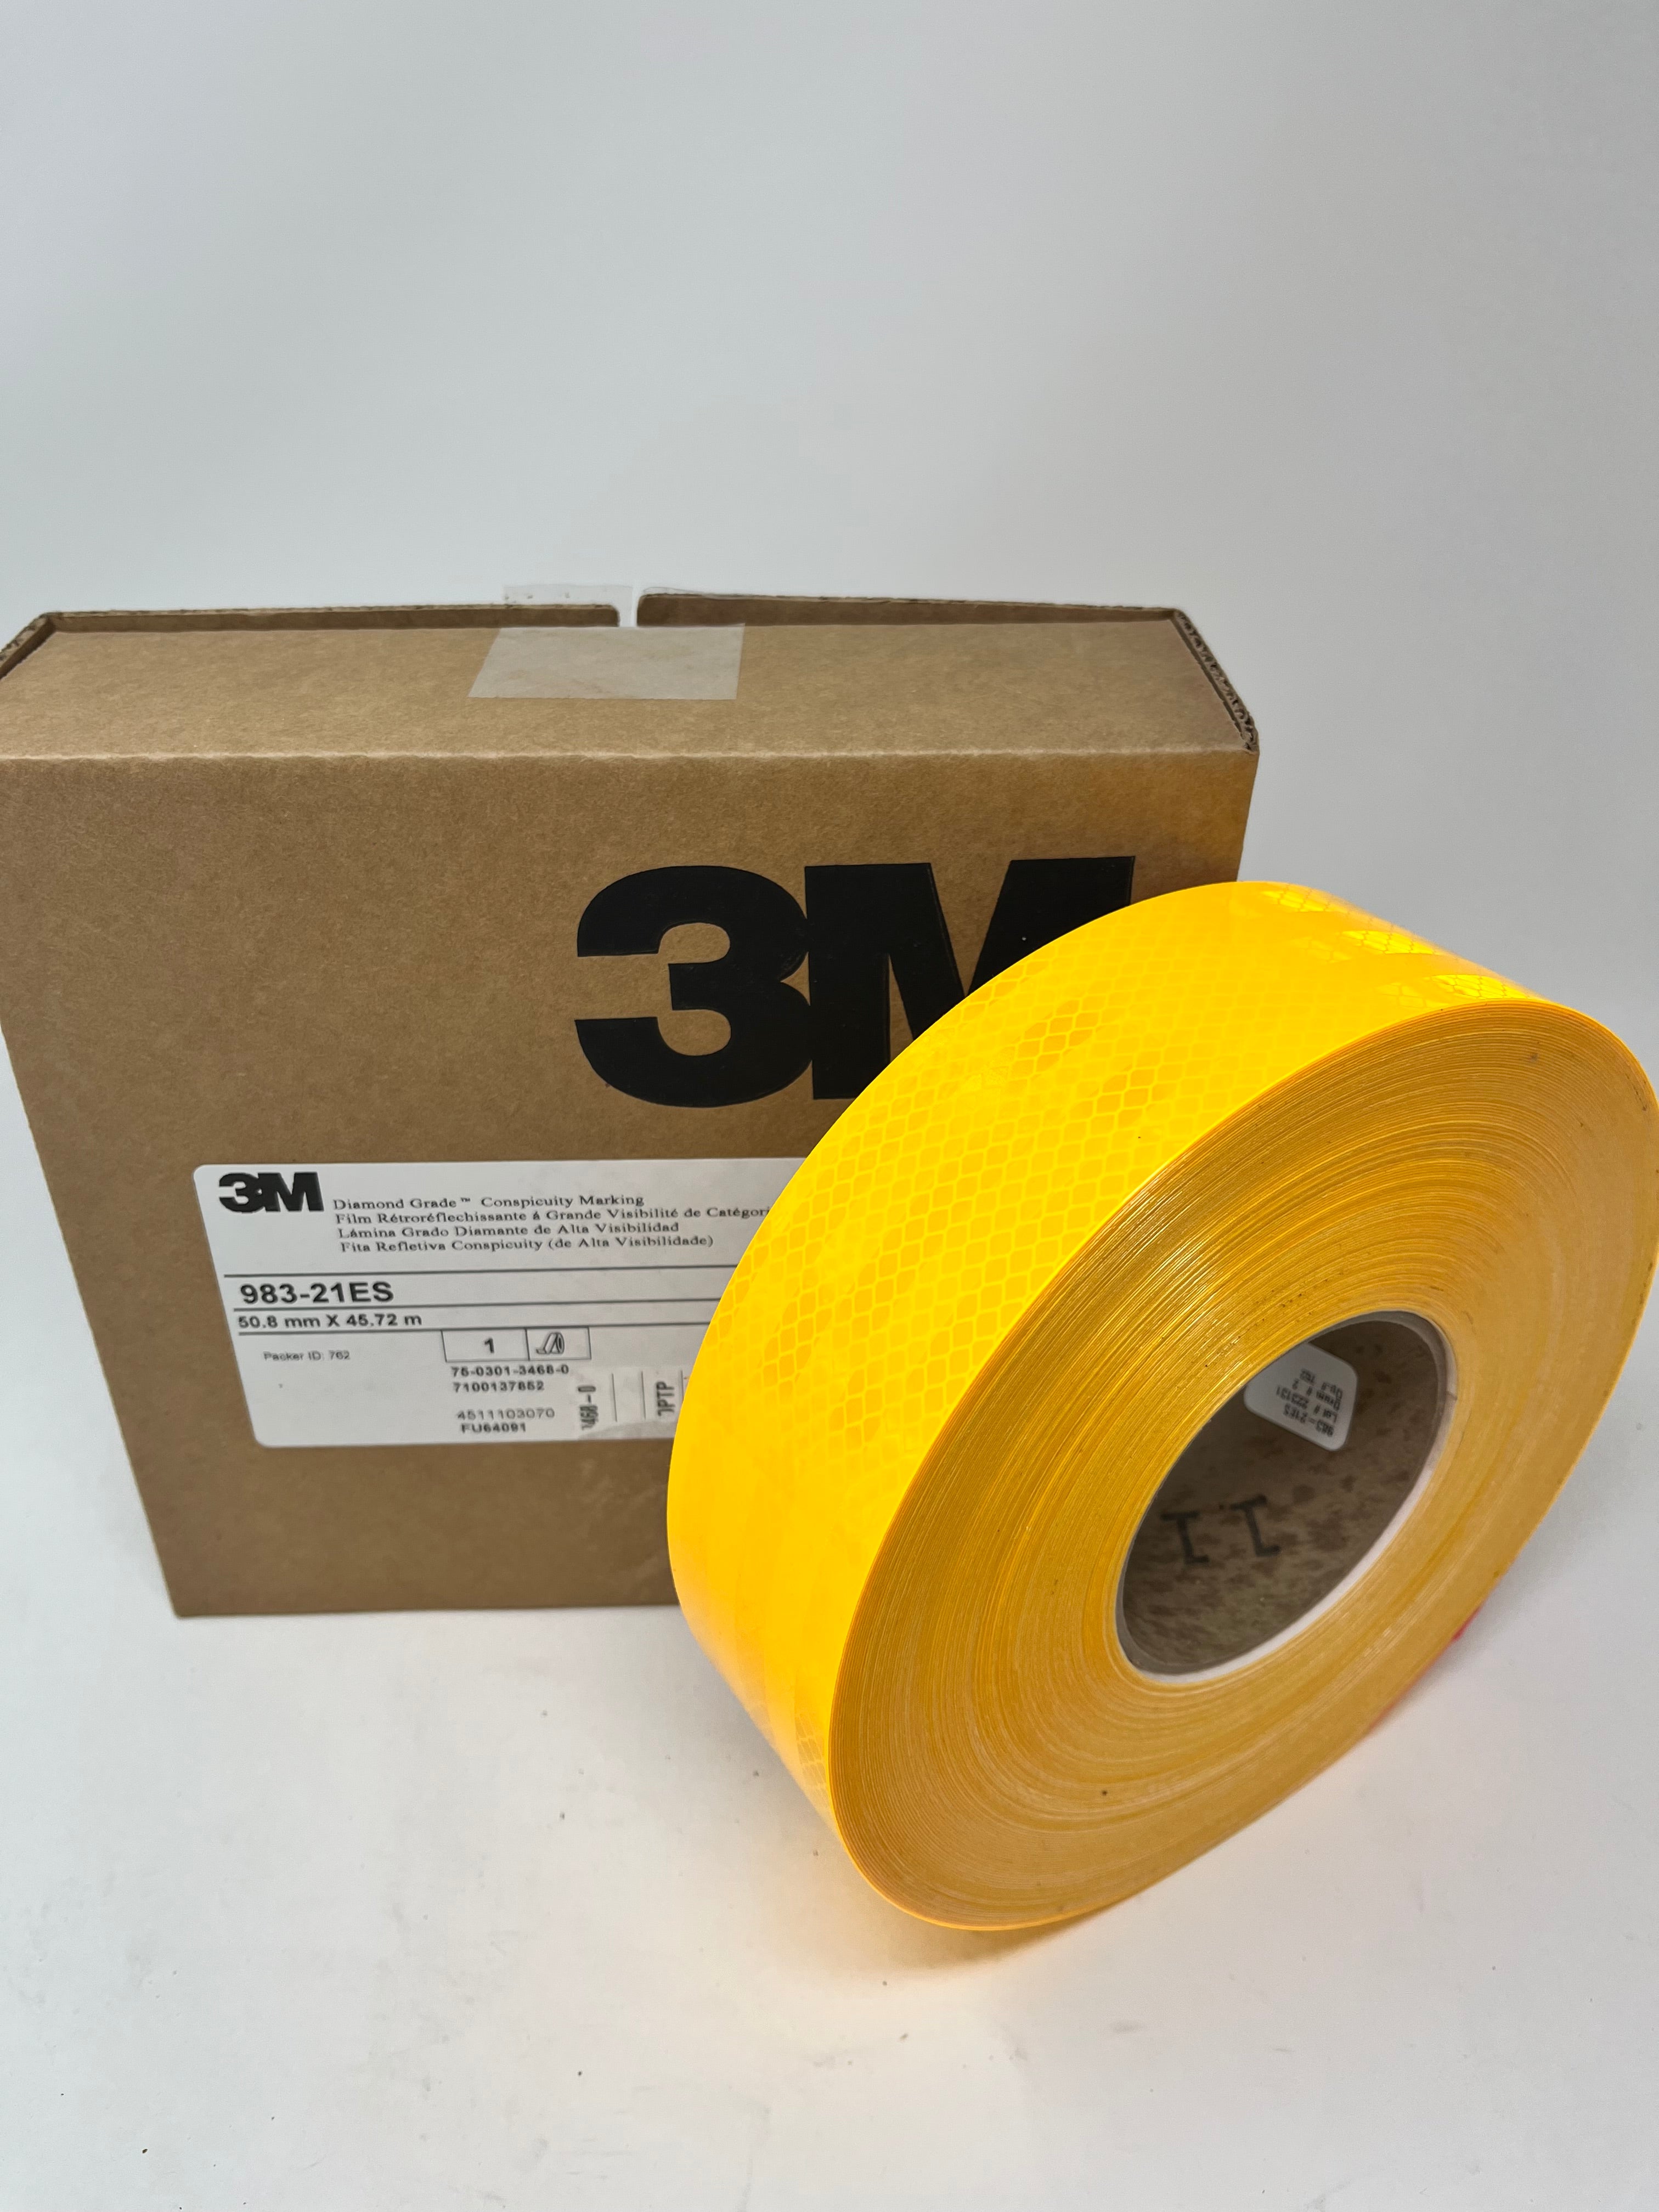 2 x 150' Roll 3M Reflective Safety Tape - Fluorescent Yellow